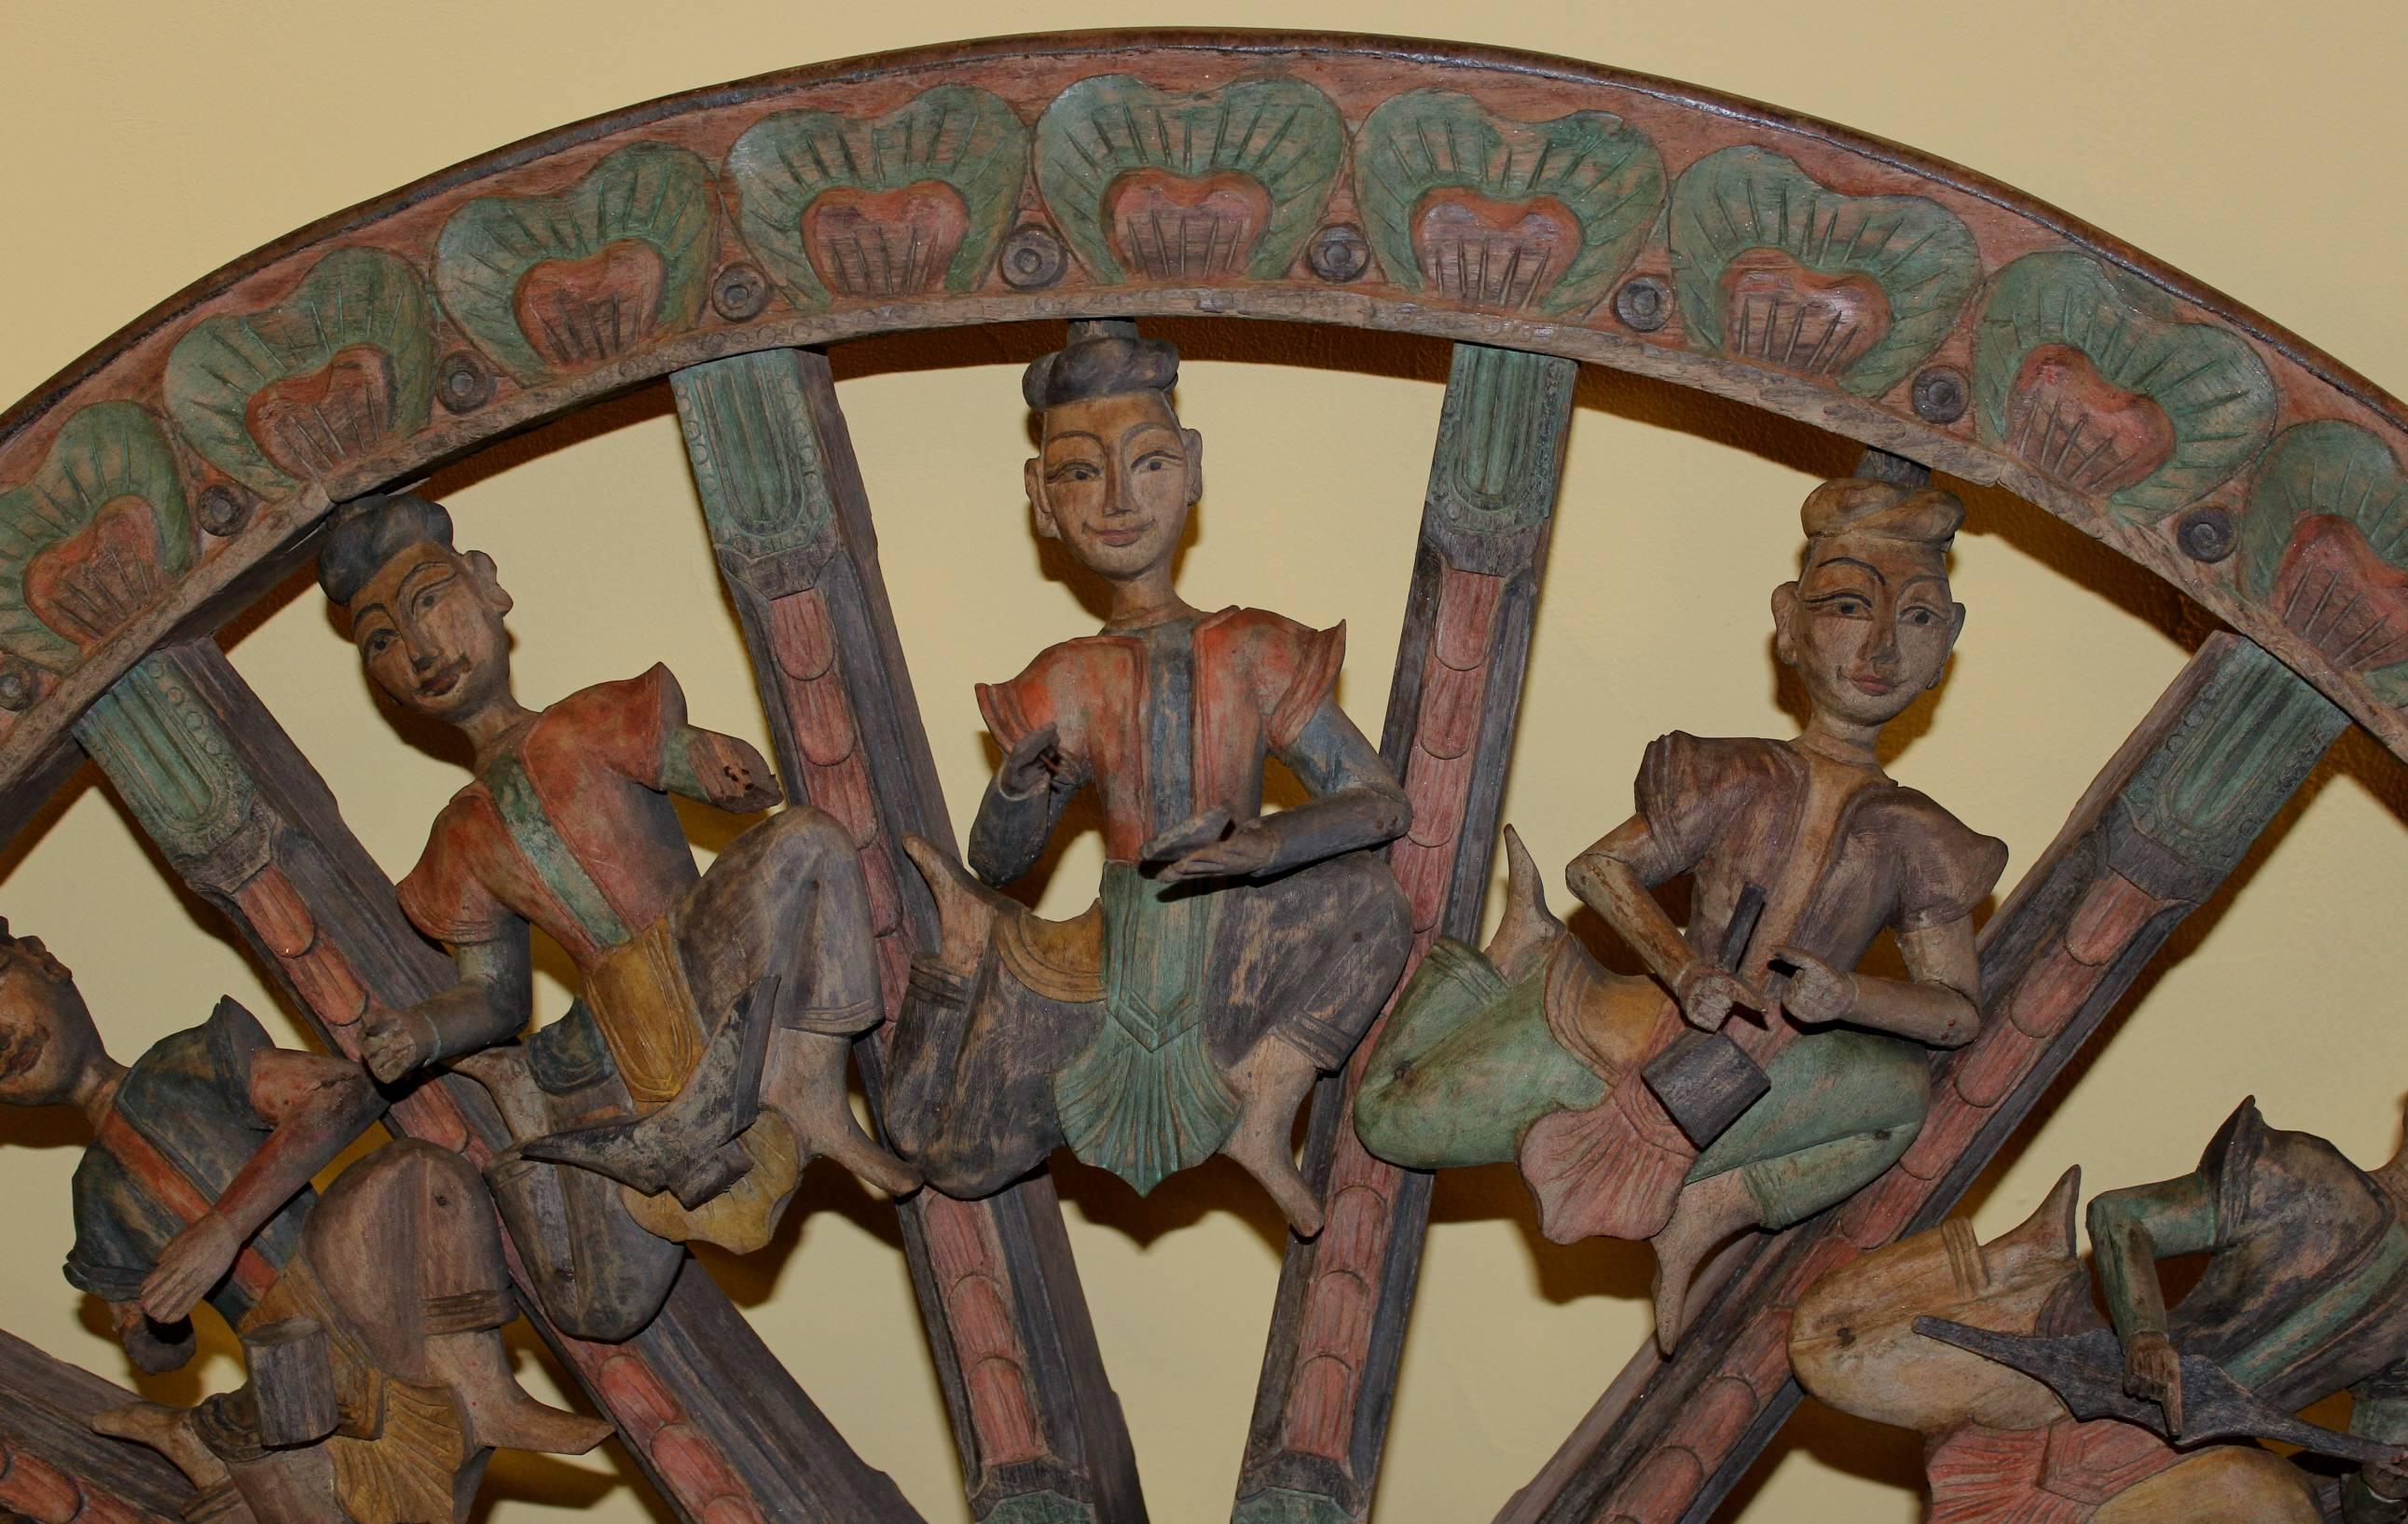 A polychrome wooden parade or carnival cart wagon wheel with a variety of carved three dimensional figures playing musical instruments as decoration between the foliate carved spokes and outer rim, which is lined with an iron band. Probably